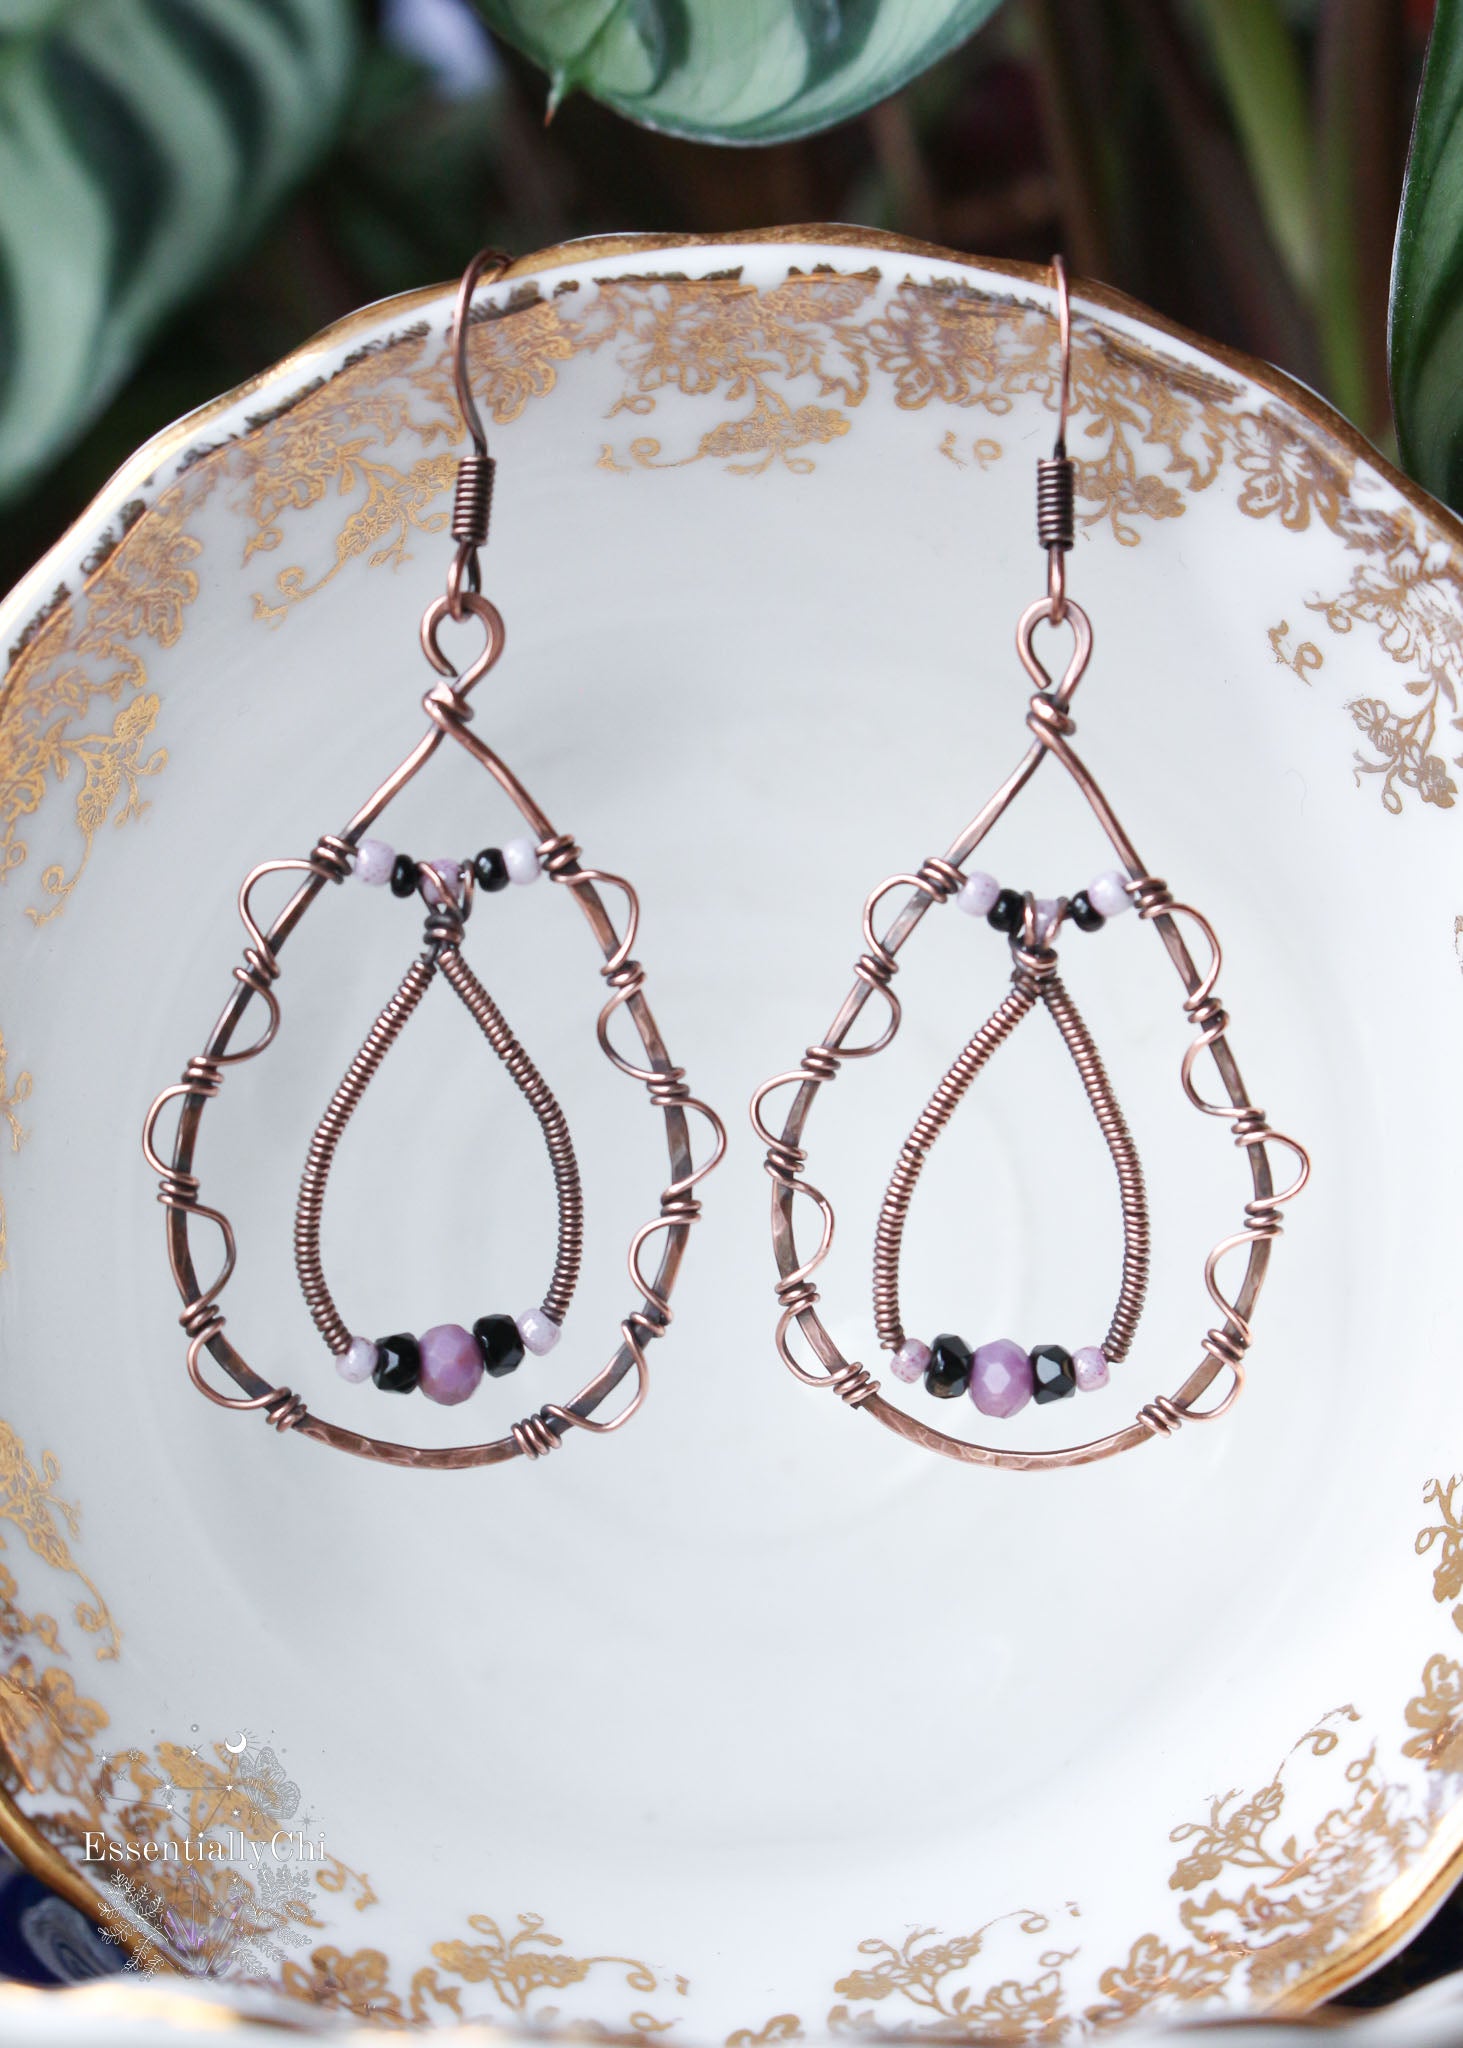 A pair of elegant tear-drop-shaped earrings with intricate filigree designs along the edges. These eye-catching earrings feature an additional tear-drop dangle inside, adorned with delicate pink and black seed beads. At the center of each earring, a faceted Phosphosiderite bead adds a touch of sophistication and metaphysical charm. The combination of filigree detailing, seed beads, and the unique gemstone creates a stylish and distinctive accessory, perfect for adding a touch of elegance to any outfit.